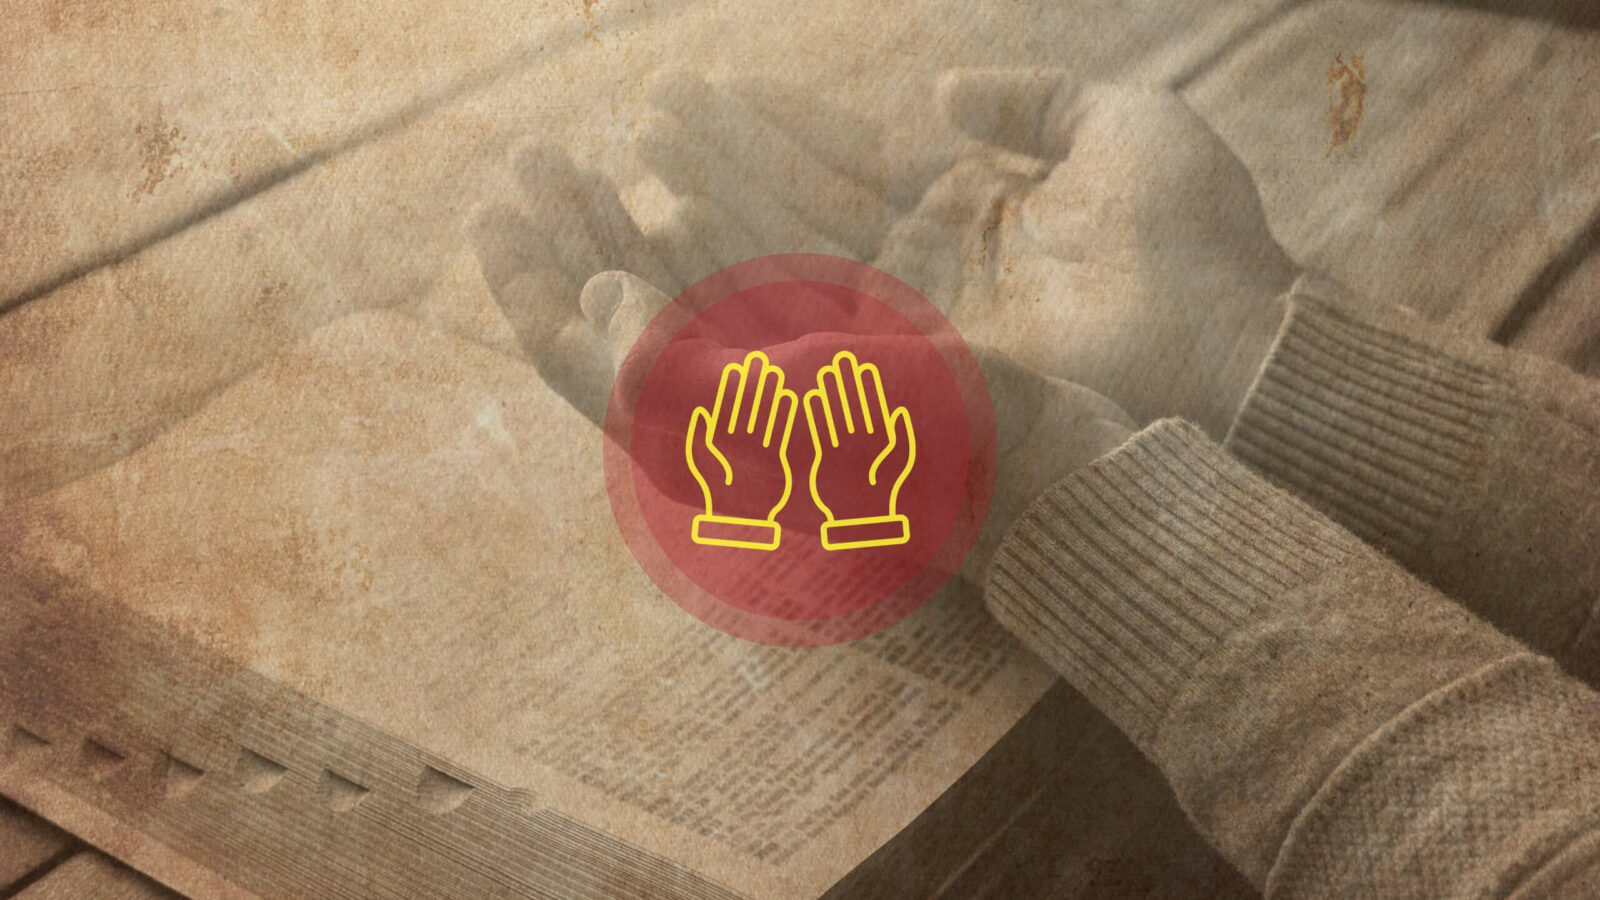 An image of hands outstretched representing the trust we can have, like Joshua and Caleb, that God will protect us and that the protection of those who would attempt to go against His will is gone.